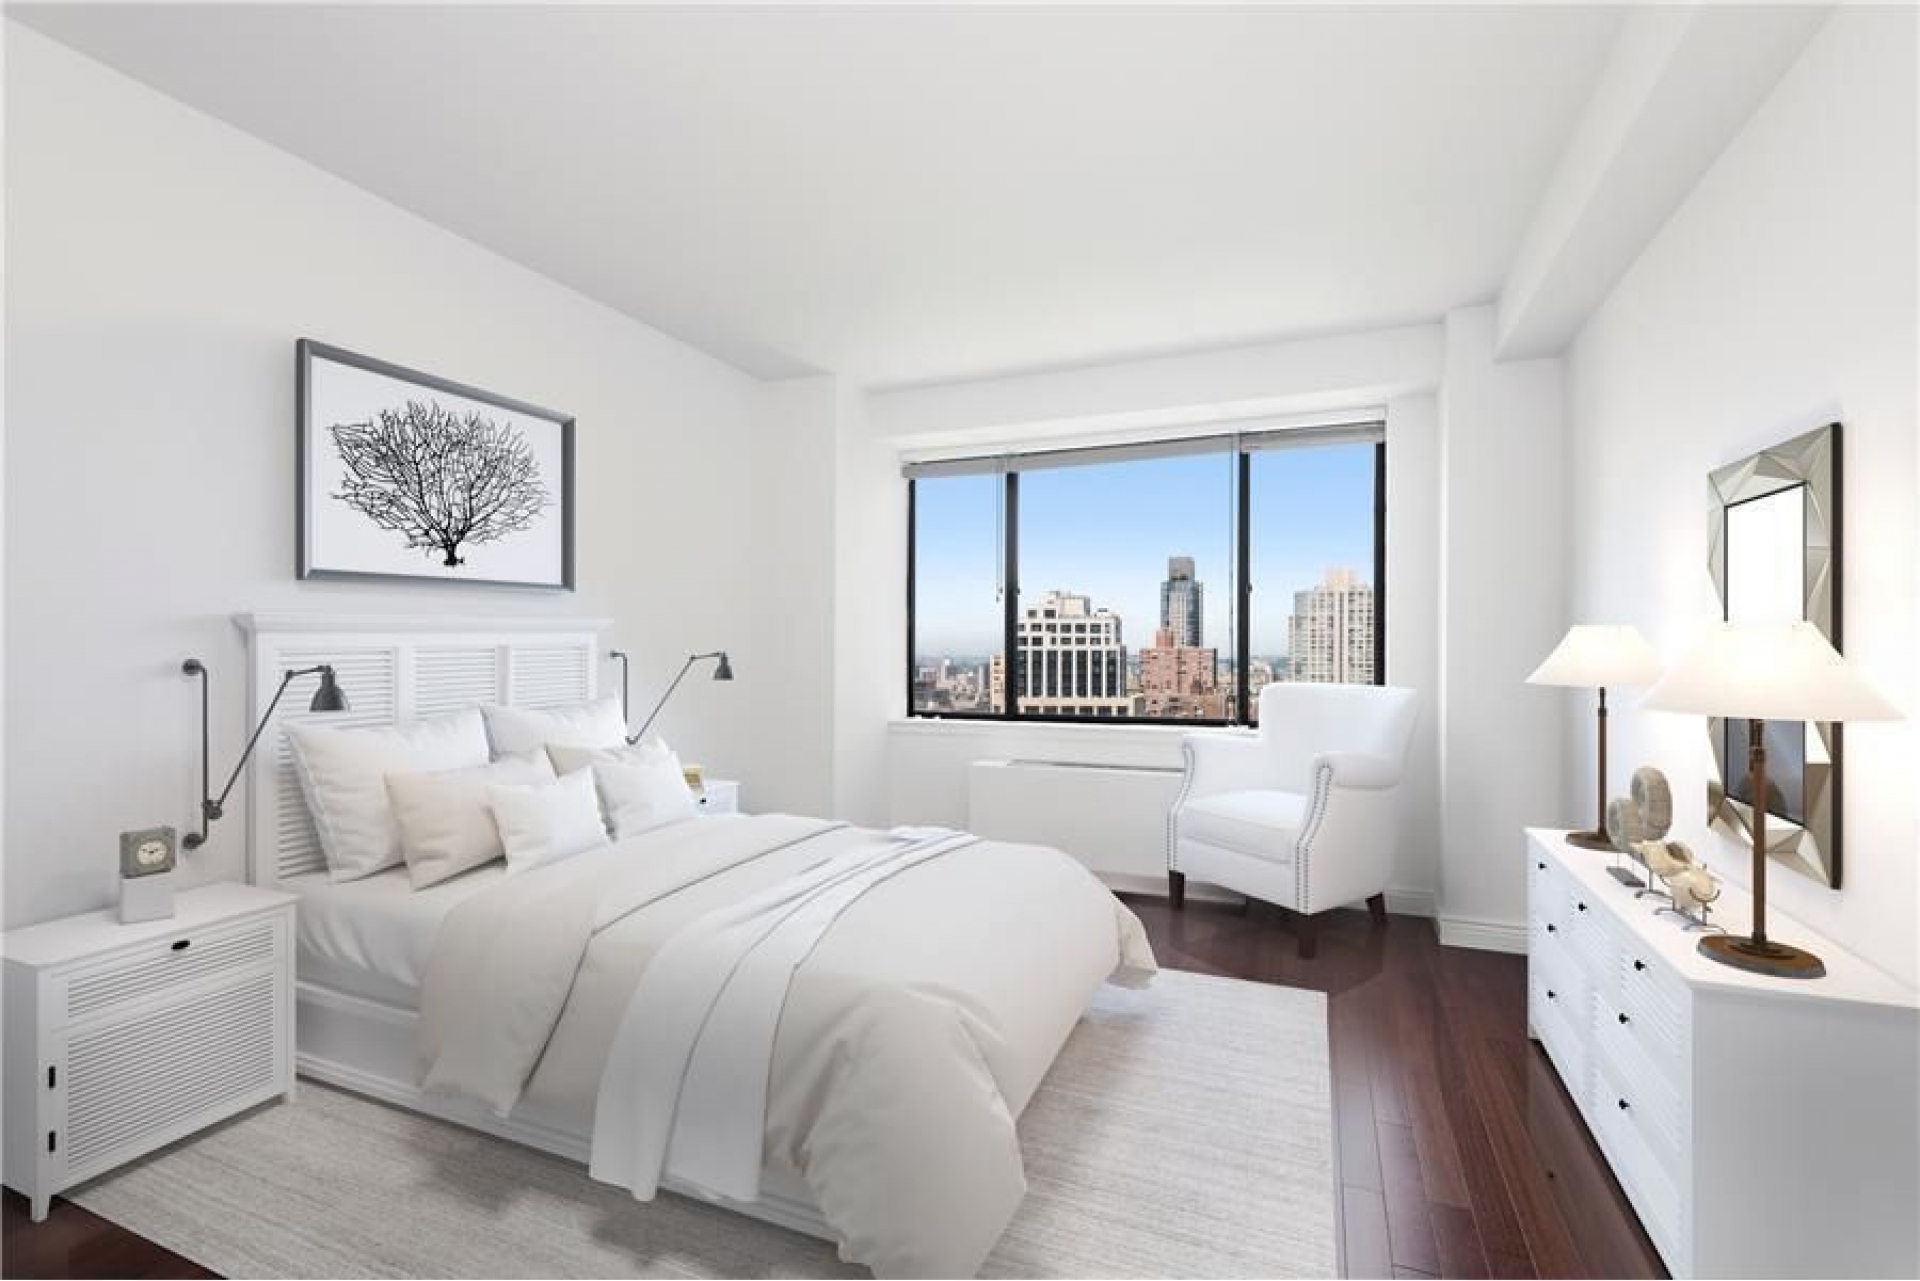 Dotta 2 rooms apartment for sale - THE STANFORD - Nomad - New York  - img396035591